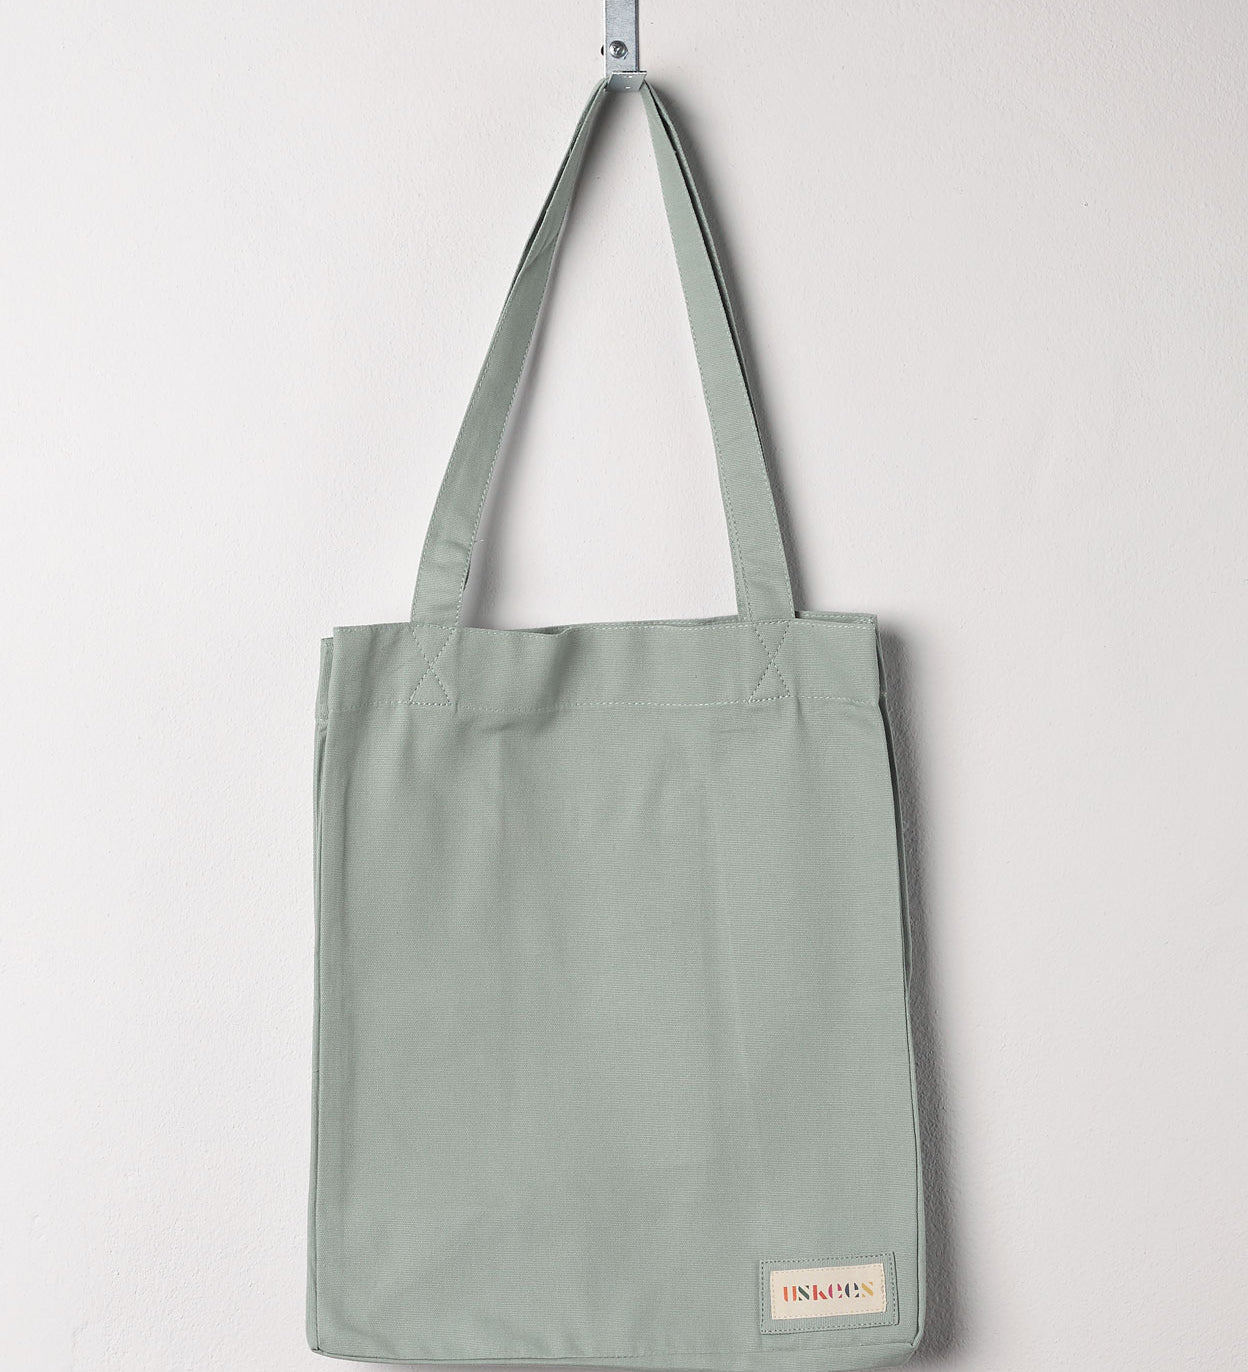 Full front hanging shot of Uskees #4002, small jade tote bag, showing double handles and Uskees woven logo.